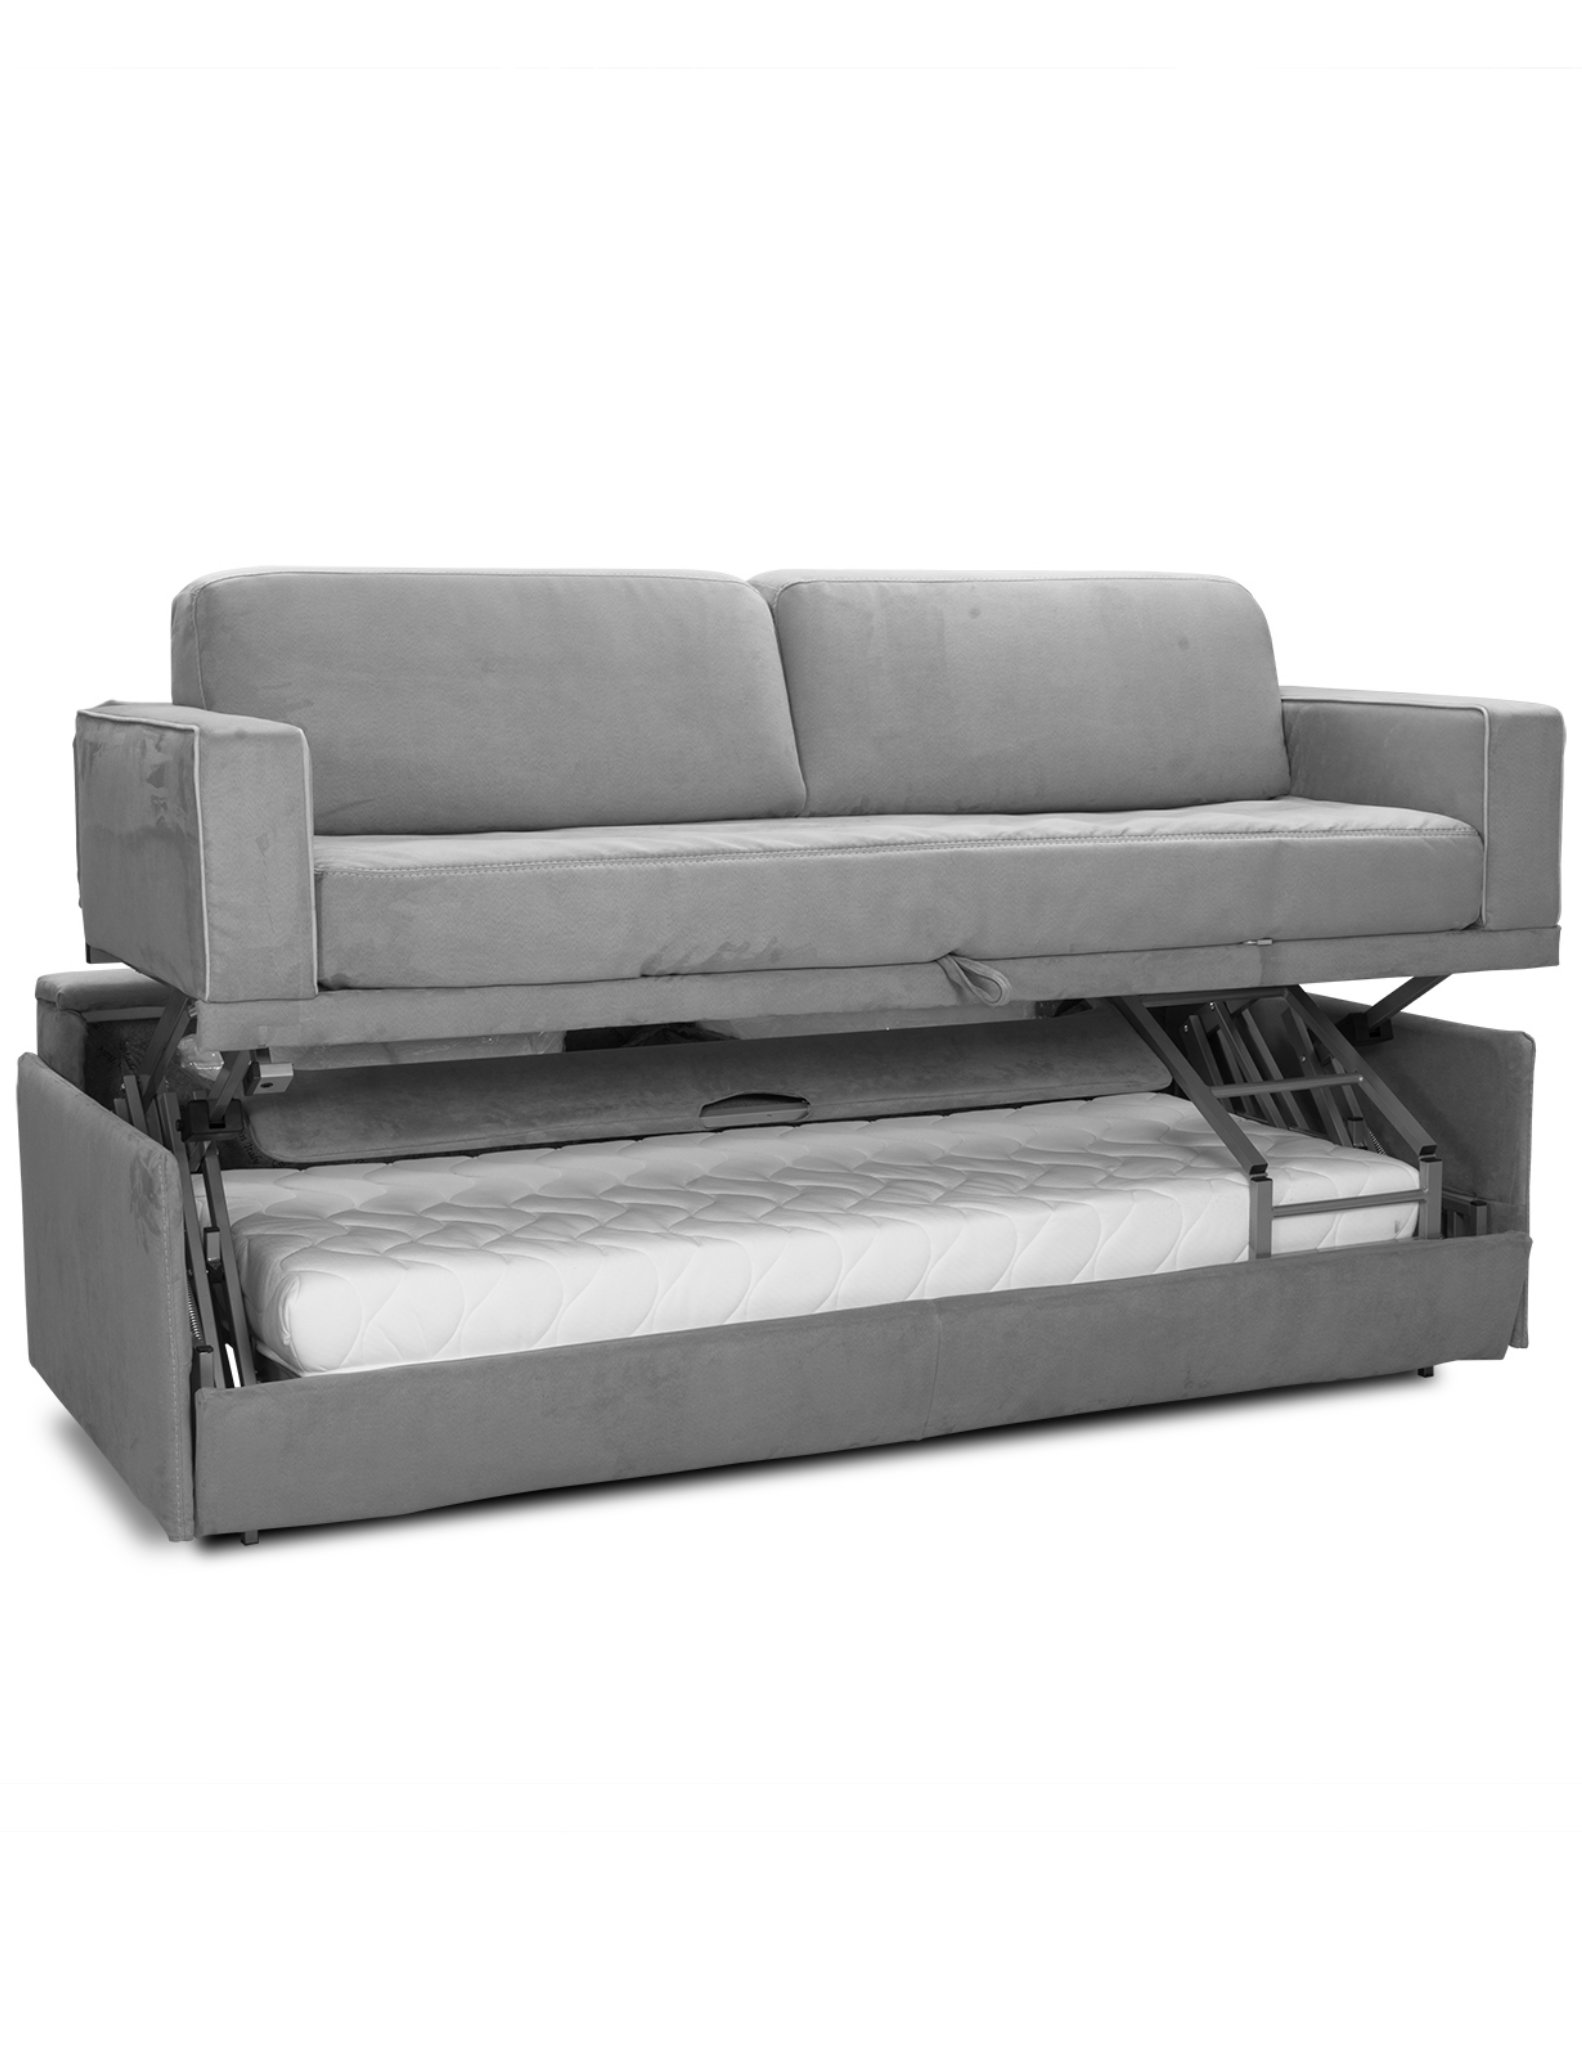 Bunk Bed Couch Transformer, Fold Up Bunk Bed Couch